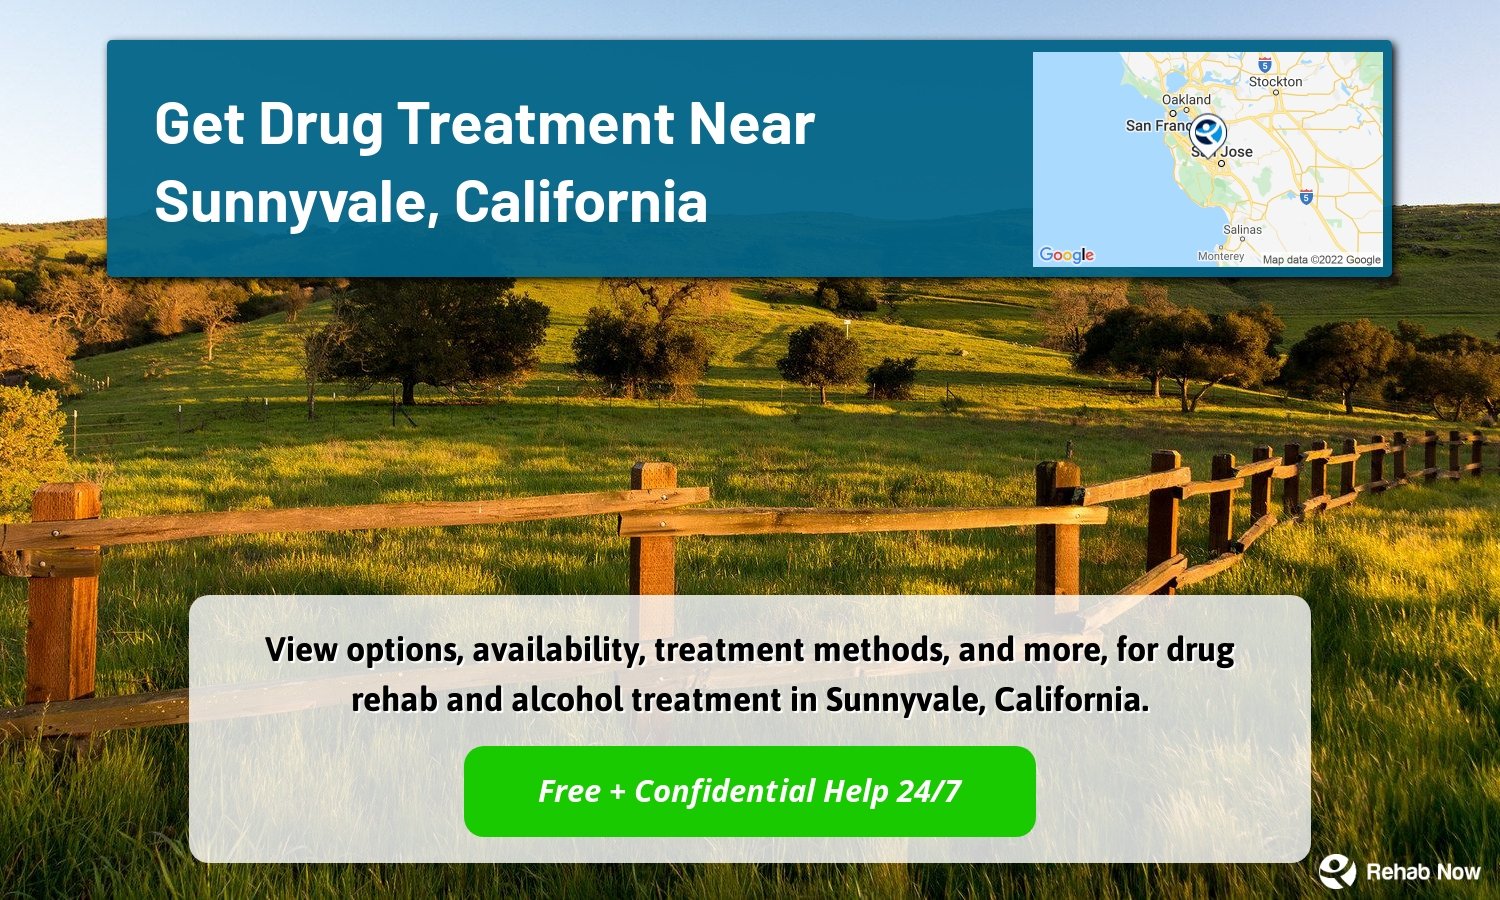 View options, availability, treatment methods, and more, for drug rehab and alcohol treatment in Sunnyvale, California.